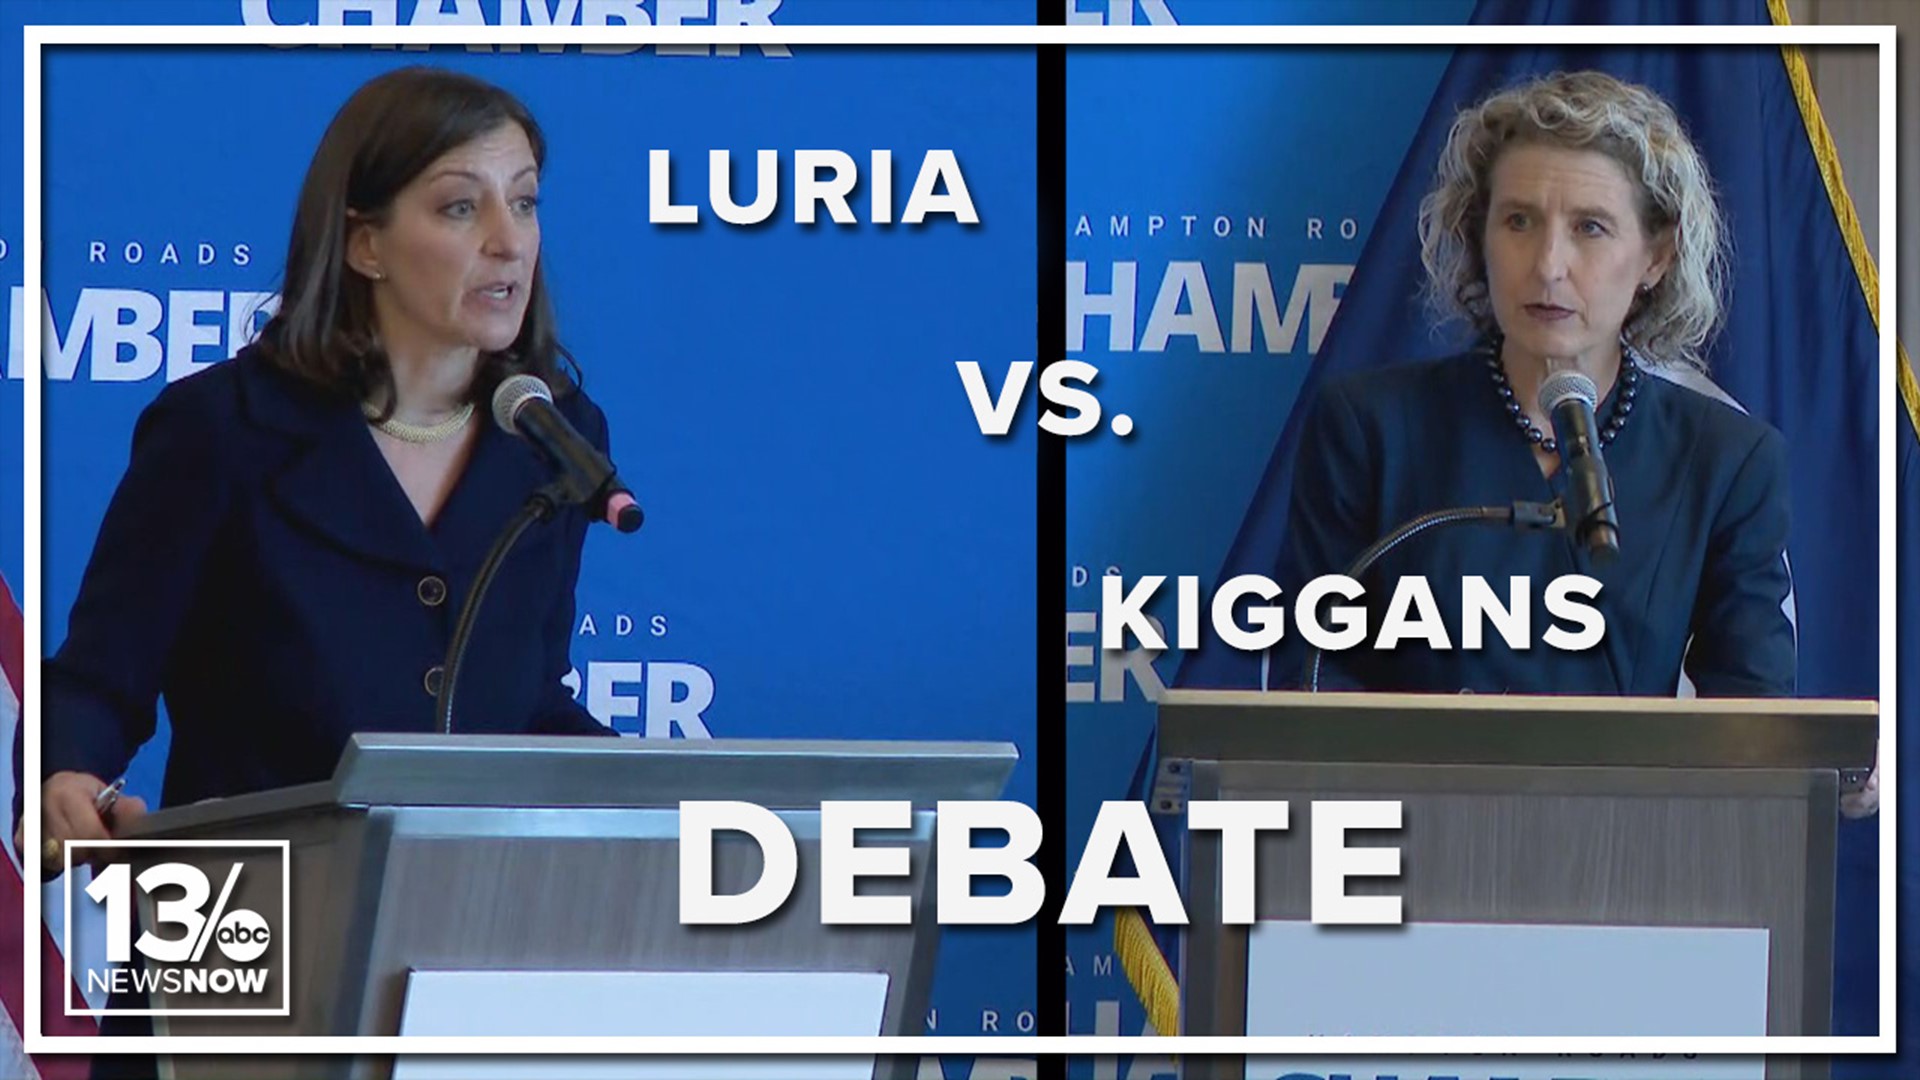 Democratic U.S. Rep. Elaine Luria and GOP challenger Jen Kiggans faced off in a combative debate in their closely watched race to represent Virginia's 2nd District.